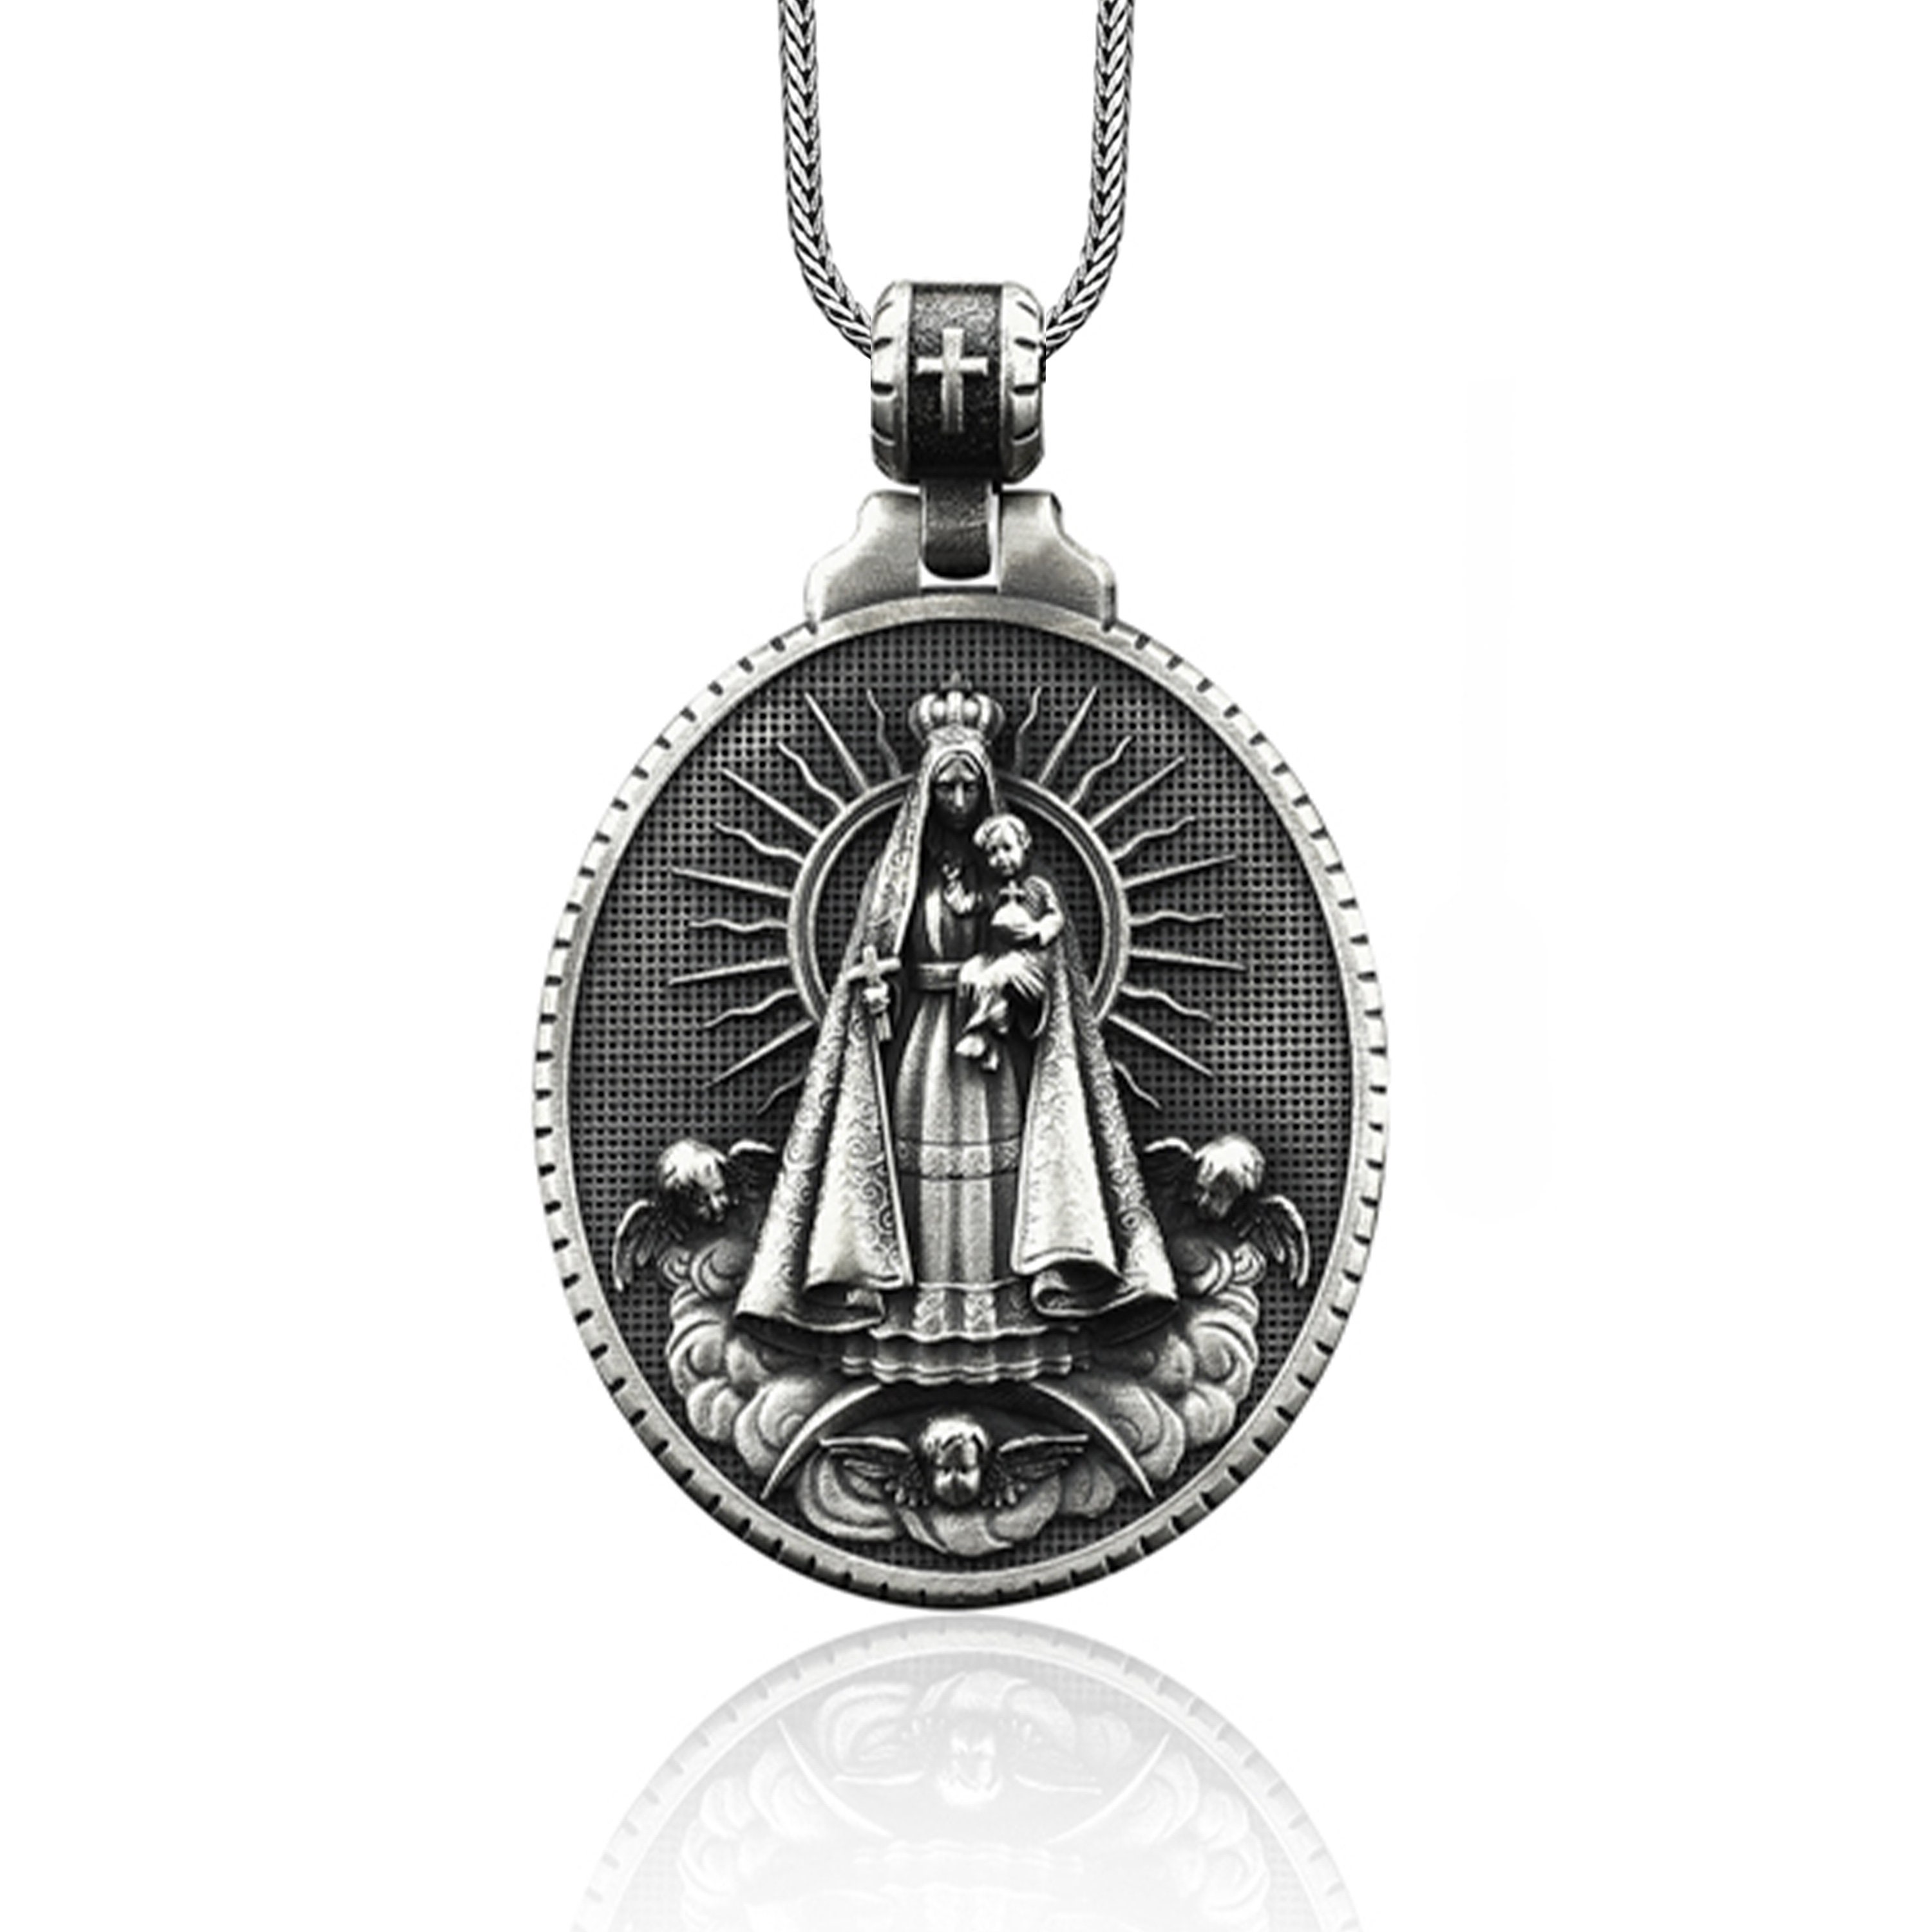  Caritas et Fides Bulk Pack of 10 - Mini Miraculous Medal  Pendant for Charm Bracelet or Necklace -1/2 Silver Oxidize Small  Miraculous Medals for Jewelry Making Catholic Made in Italy 